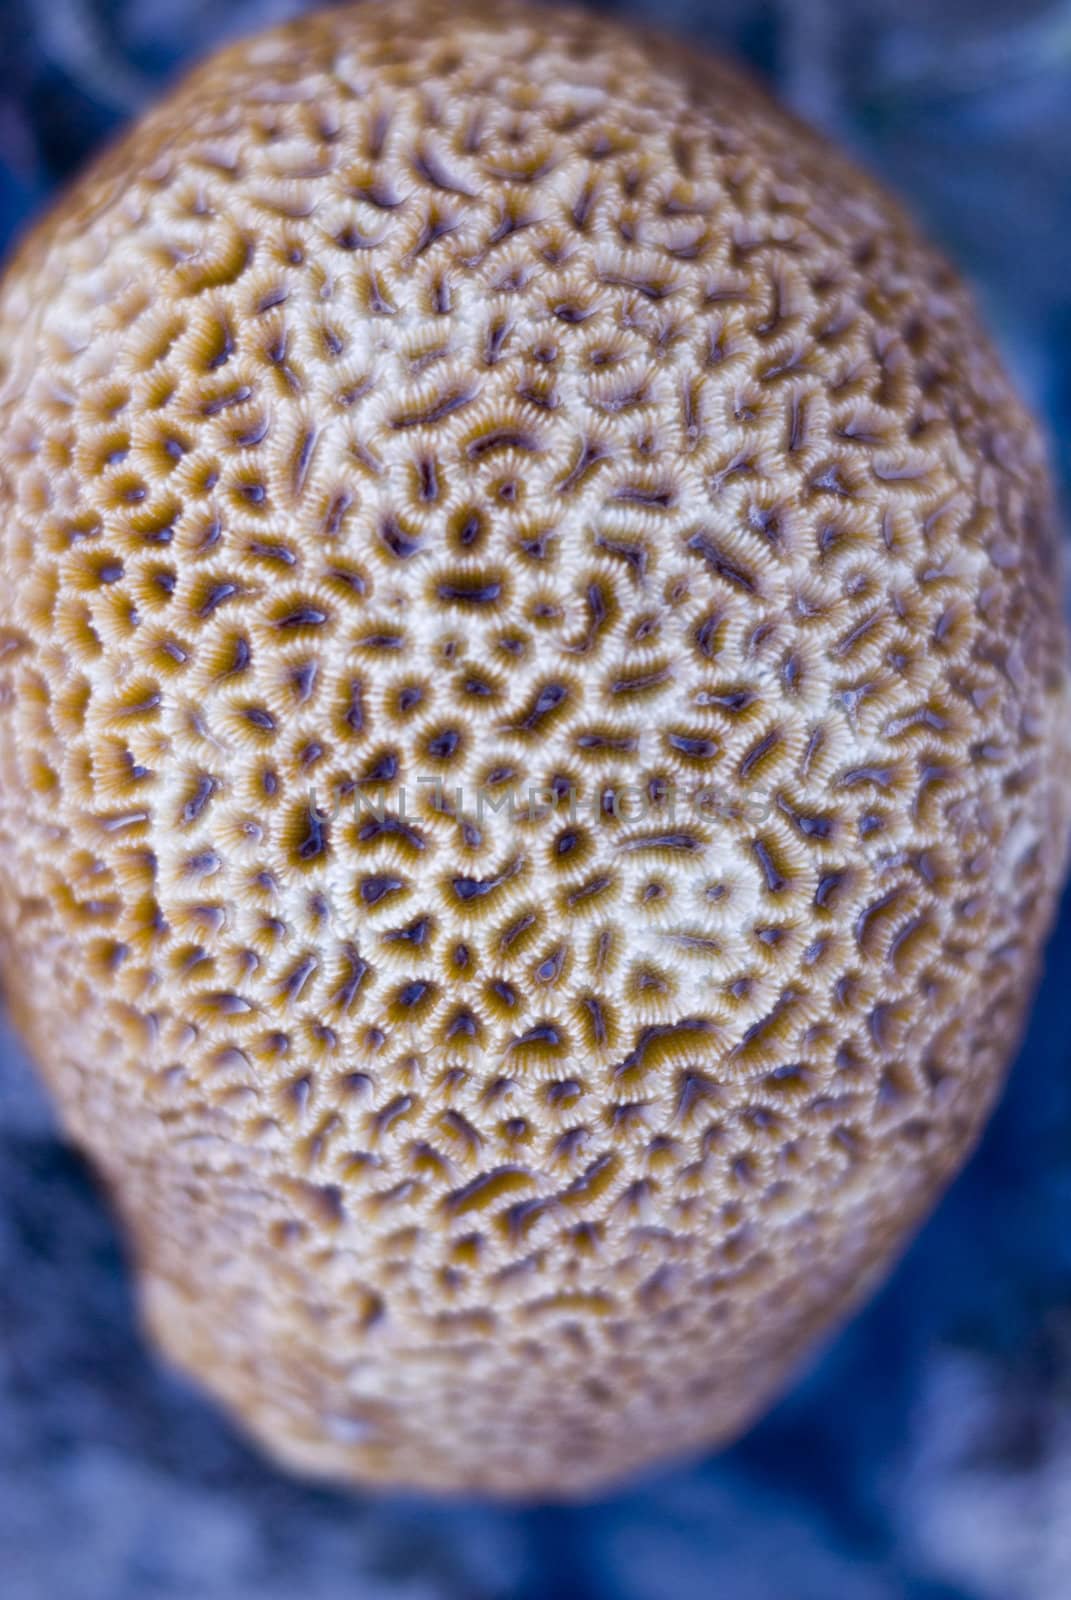 macro image one of the hard corals of the family siderastreidae, pictured with a narrow depth of field